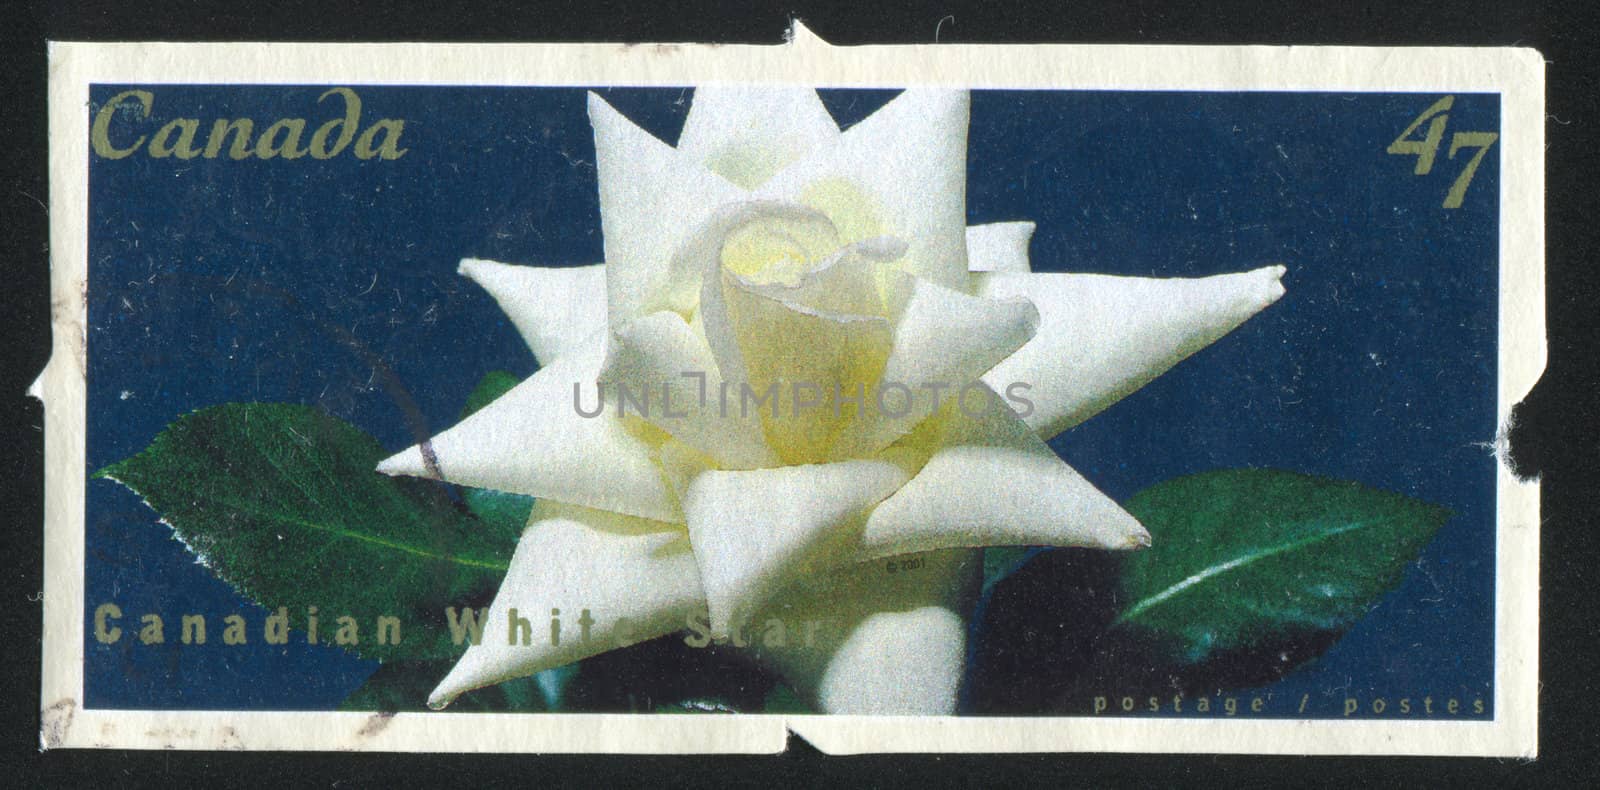 CANADA - CIRCA 2001: stamp printed by Canada, shows Rose Canadian White Star, circa 2001